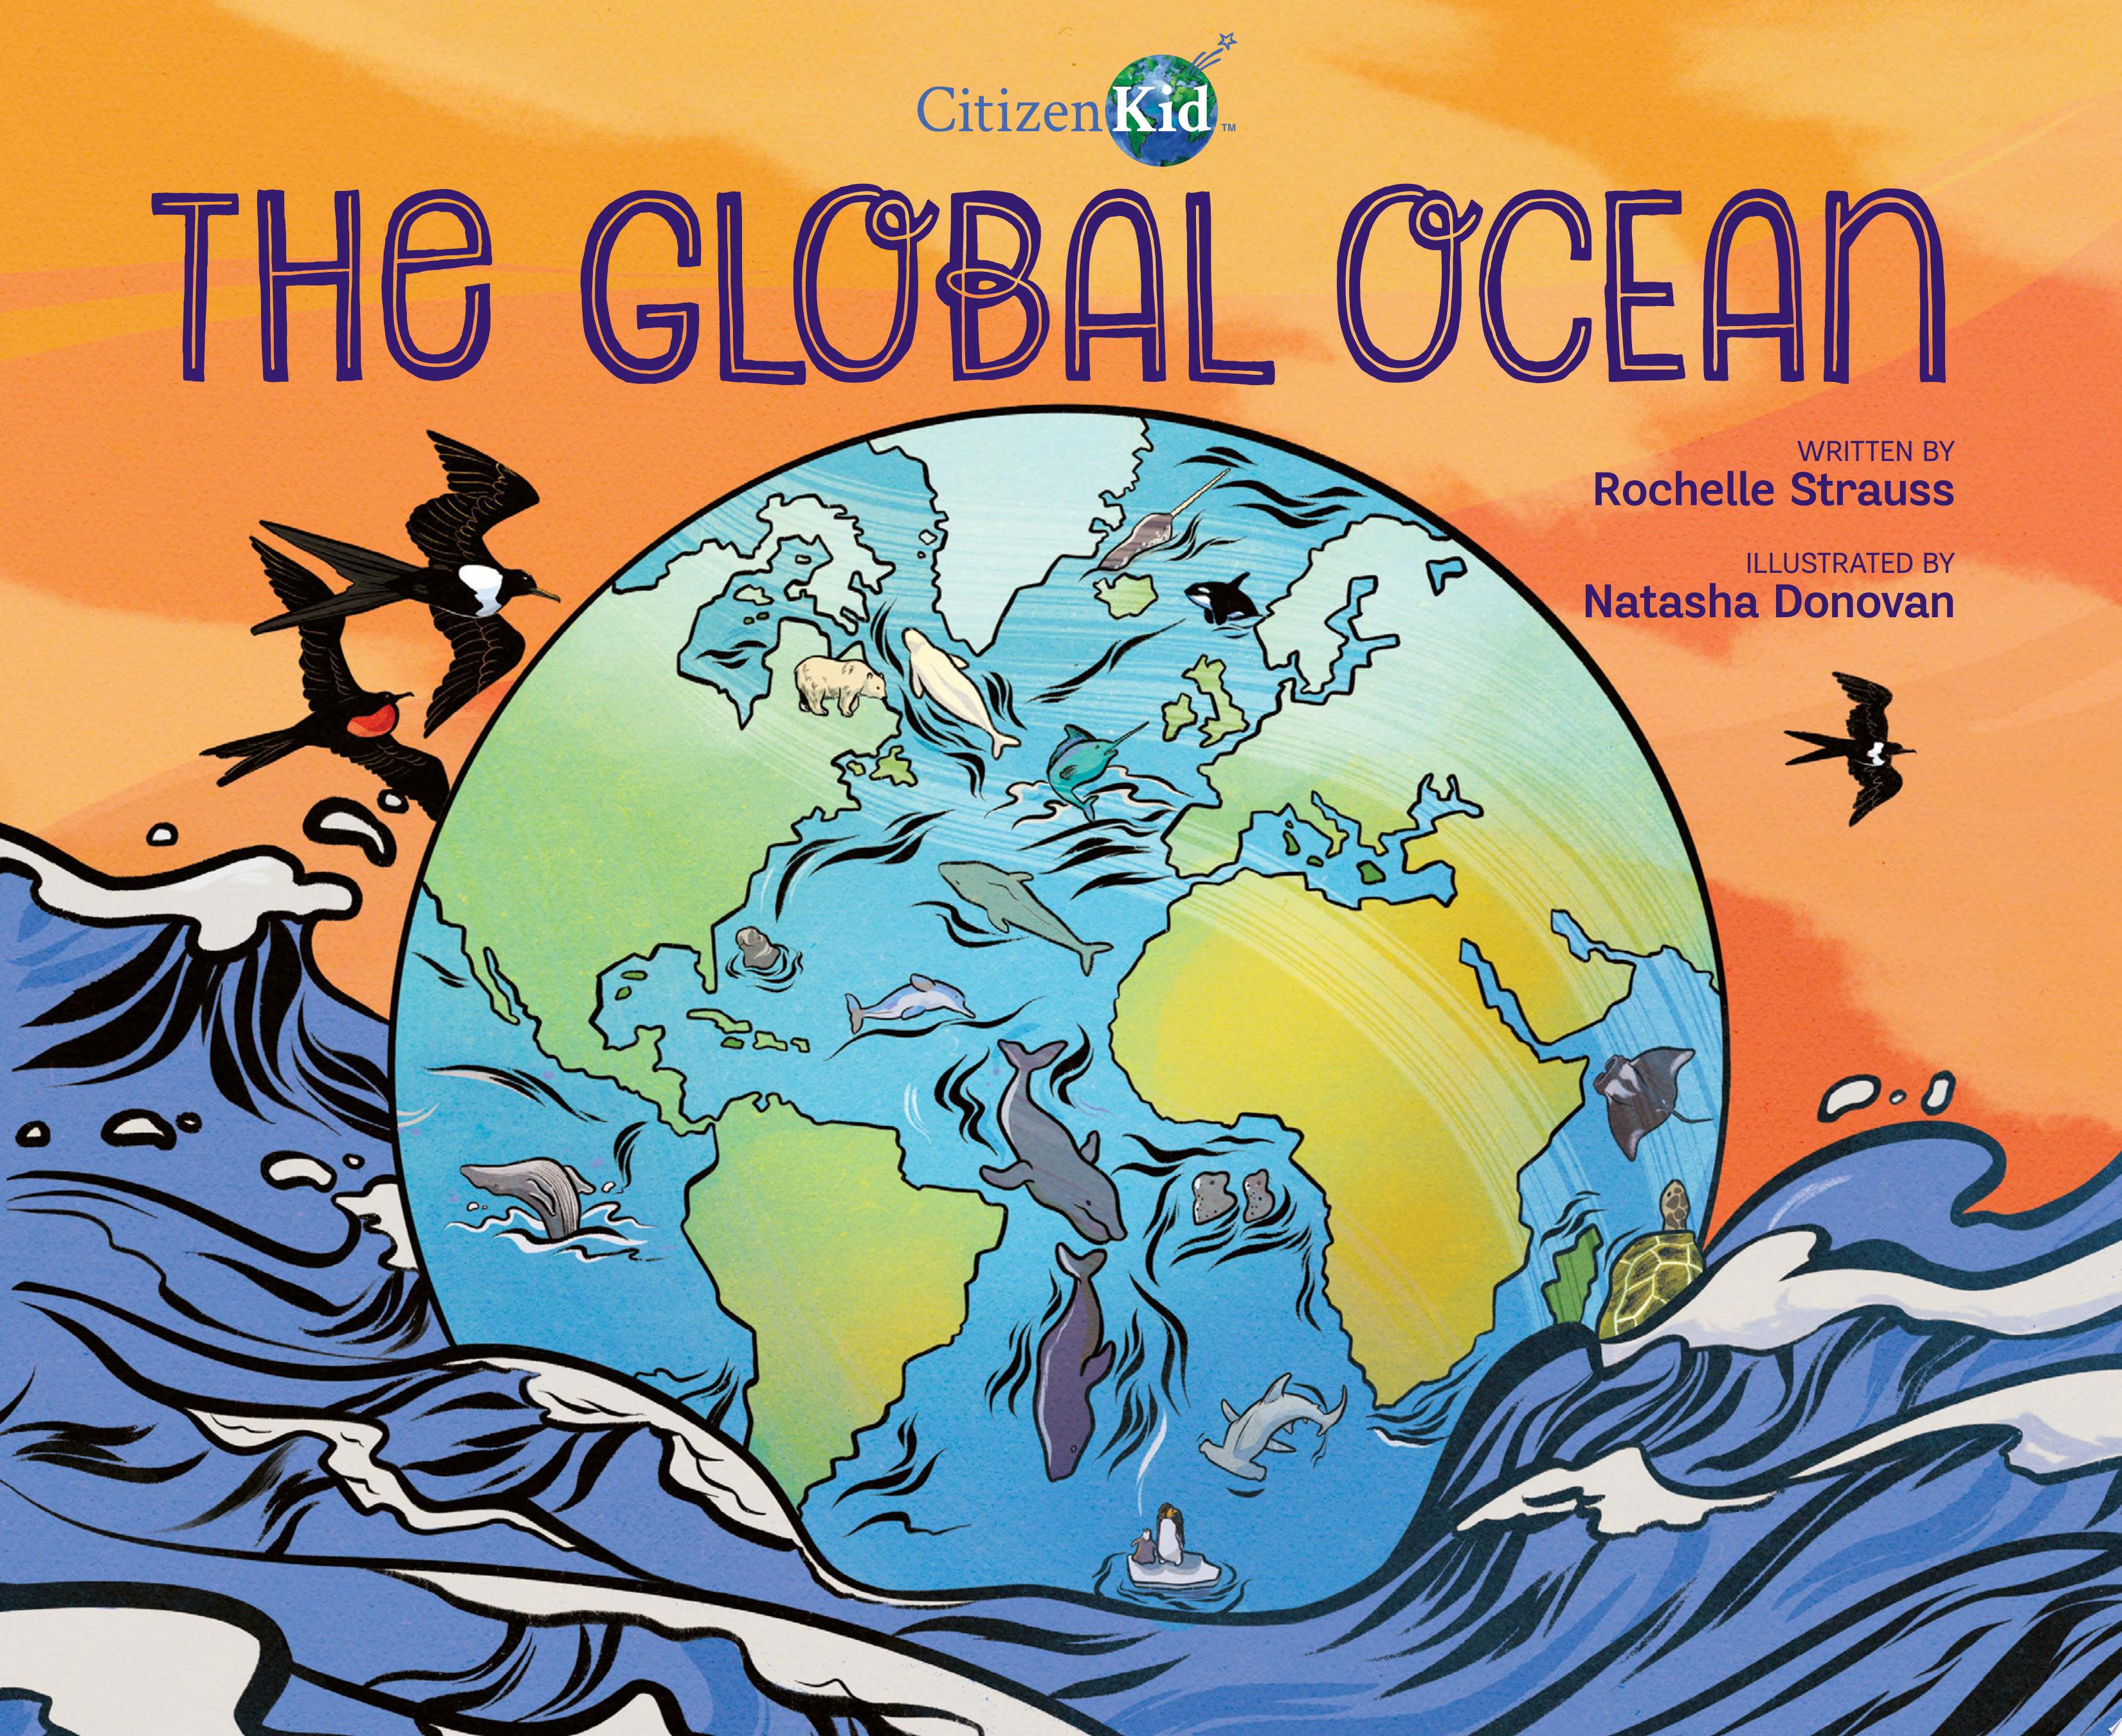 Image for "The Global Ocean"